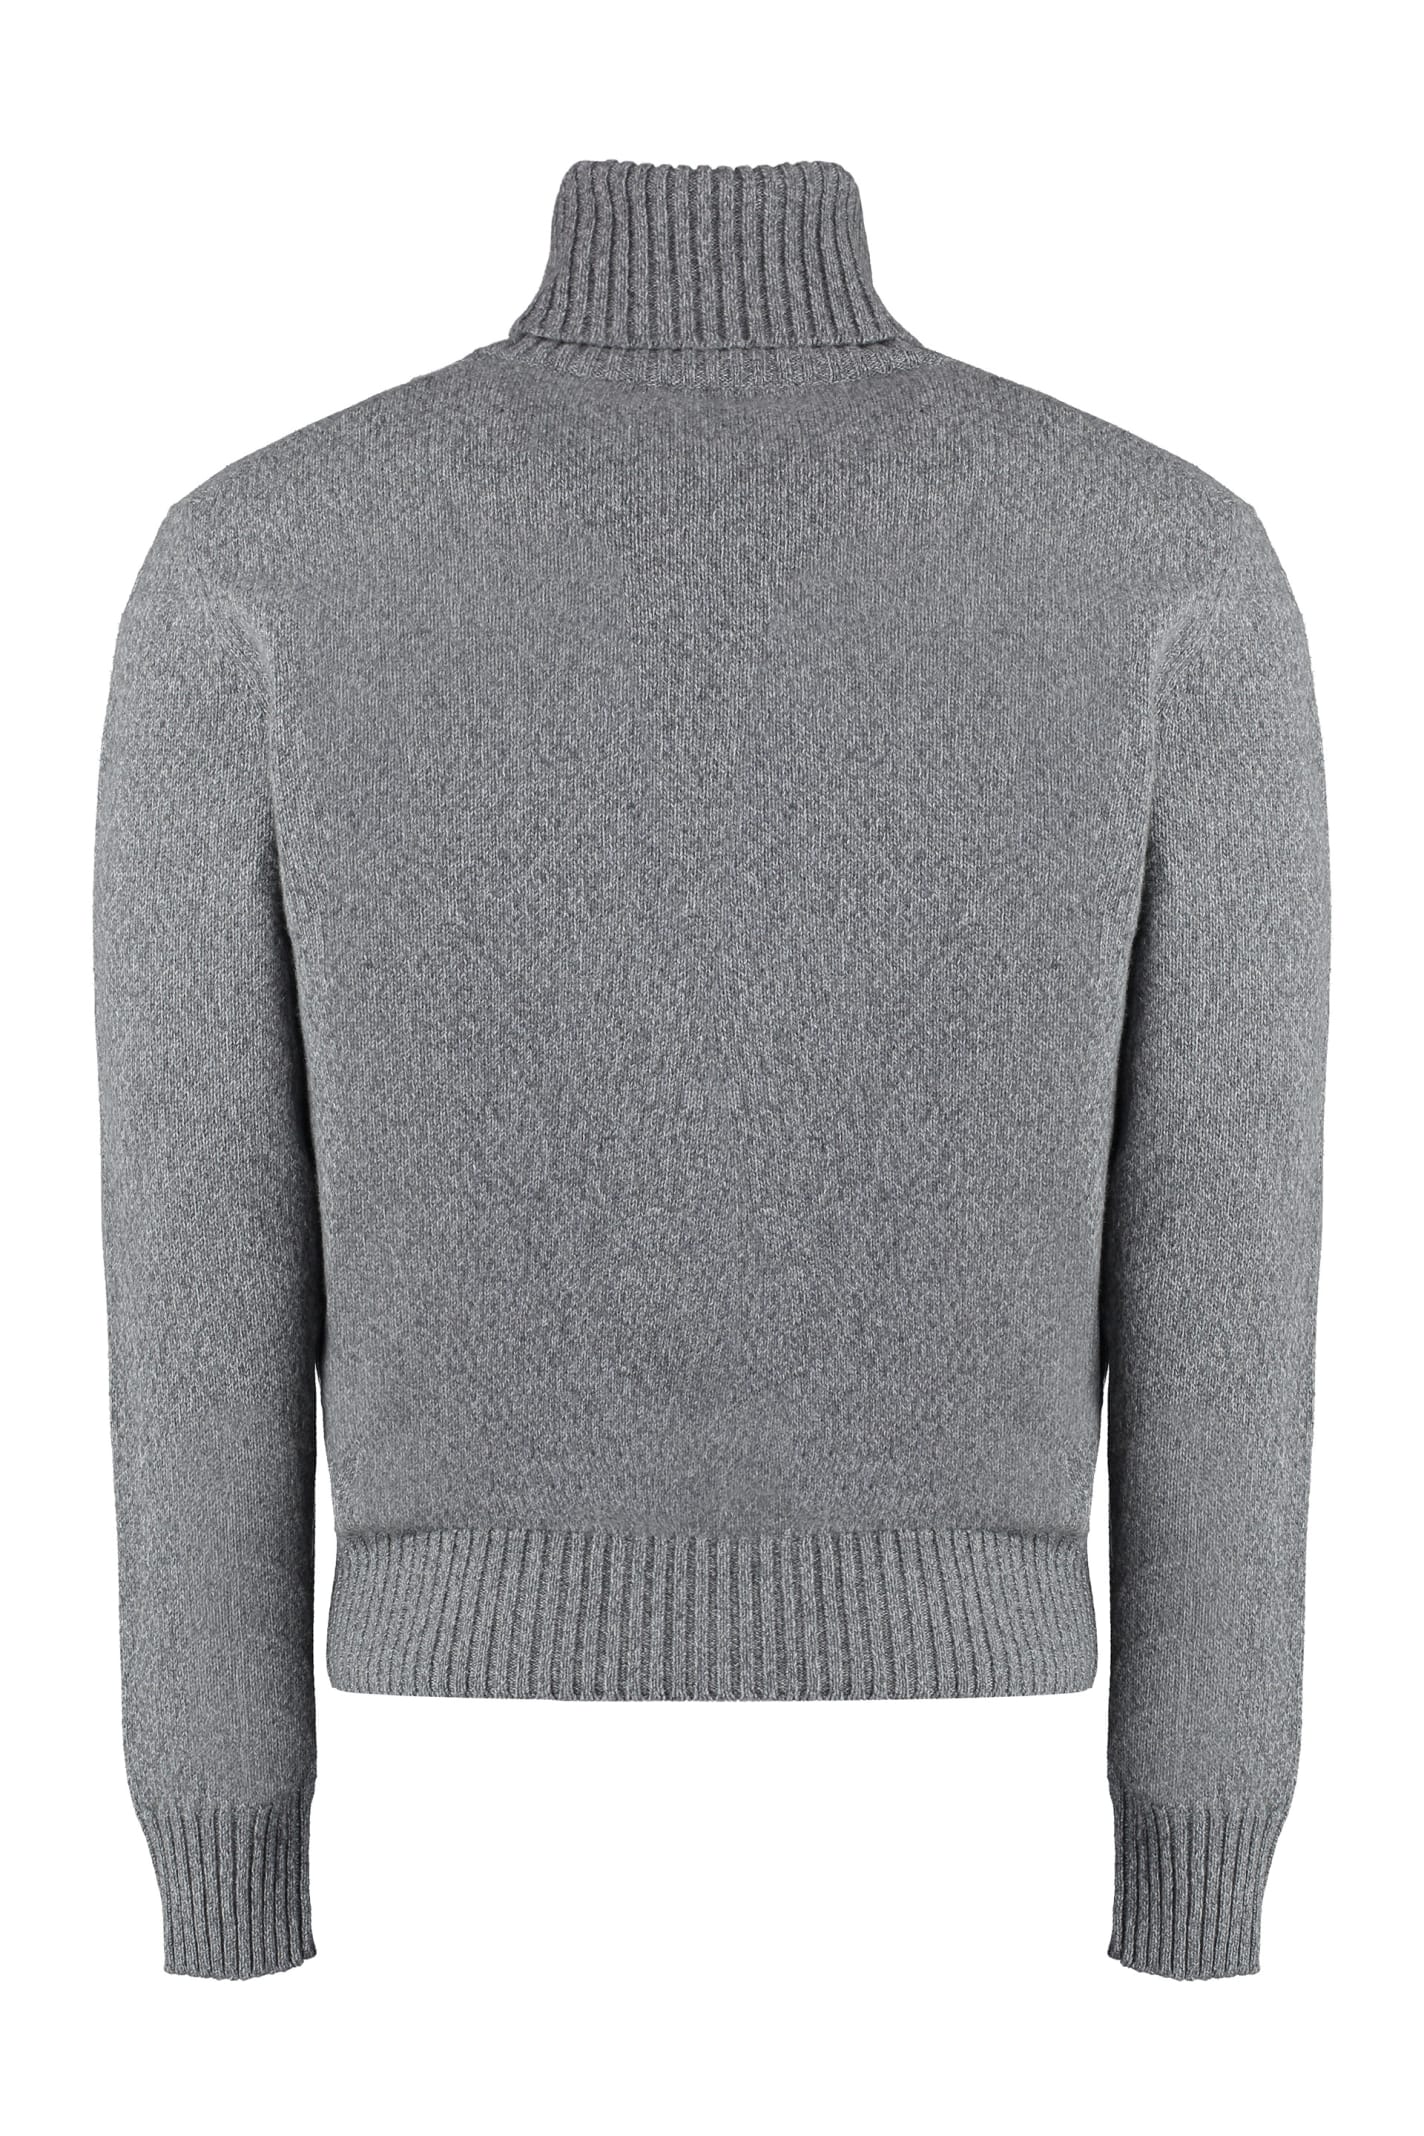 Shop Ami Alexandre Mattiussi Wool And Cashmere Sweater In Grey